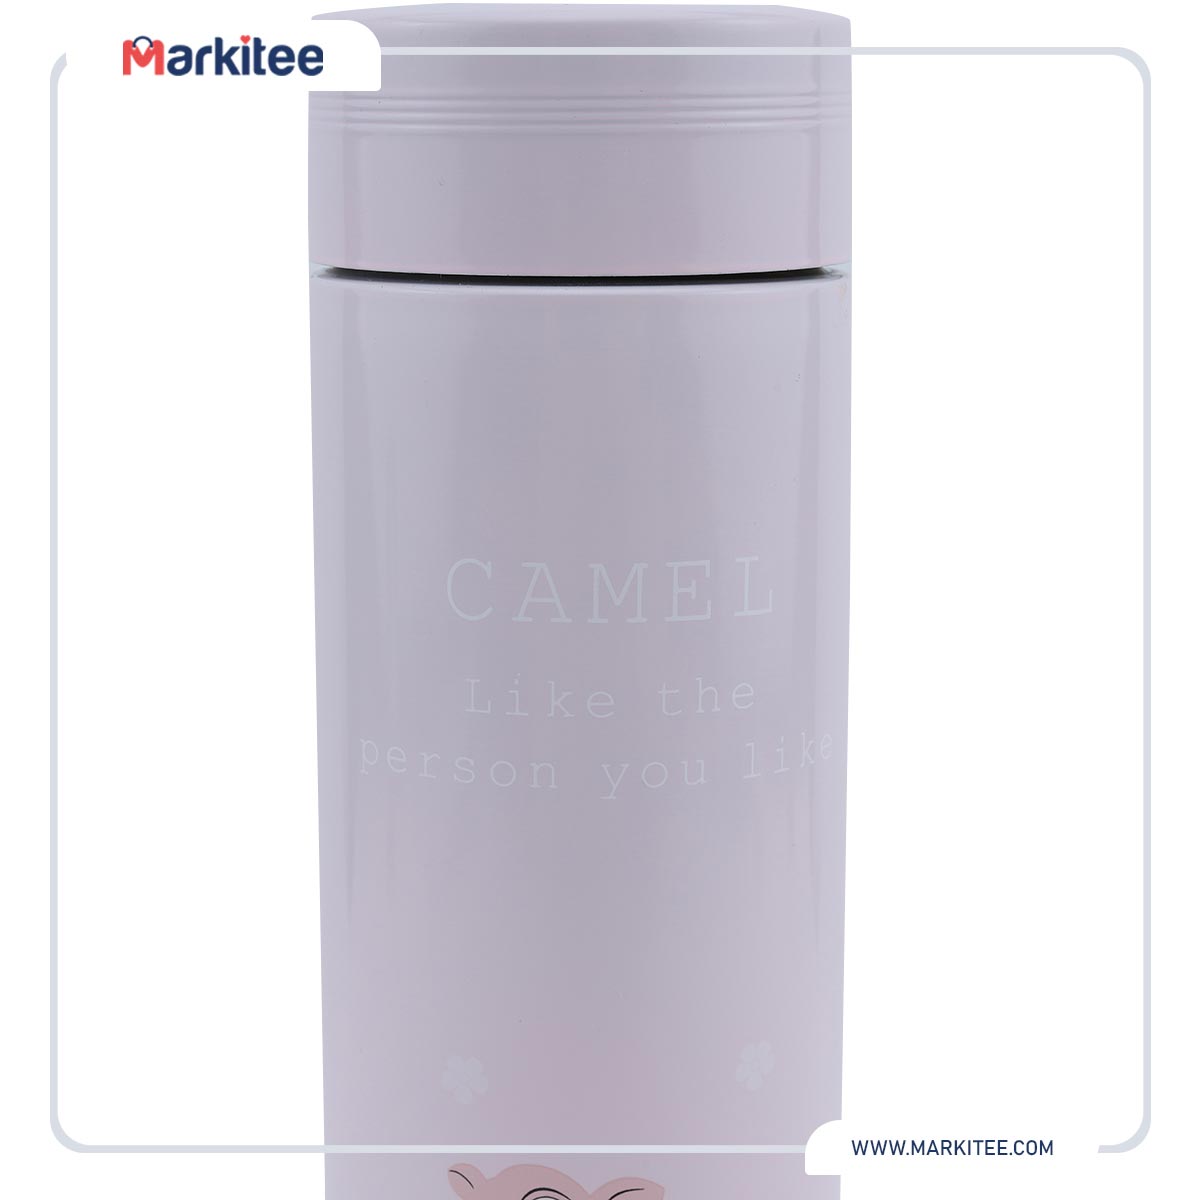 Camel stainless steel ...-hc-R-5043